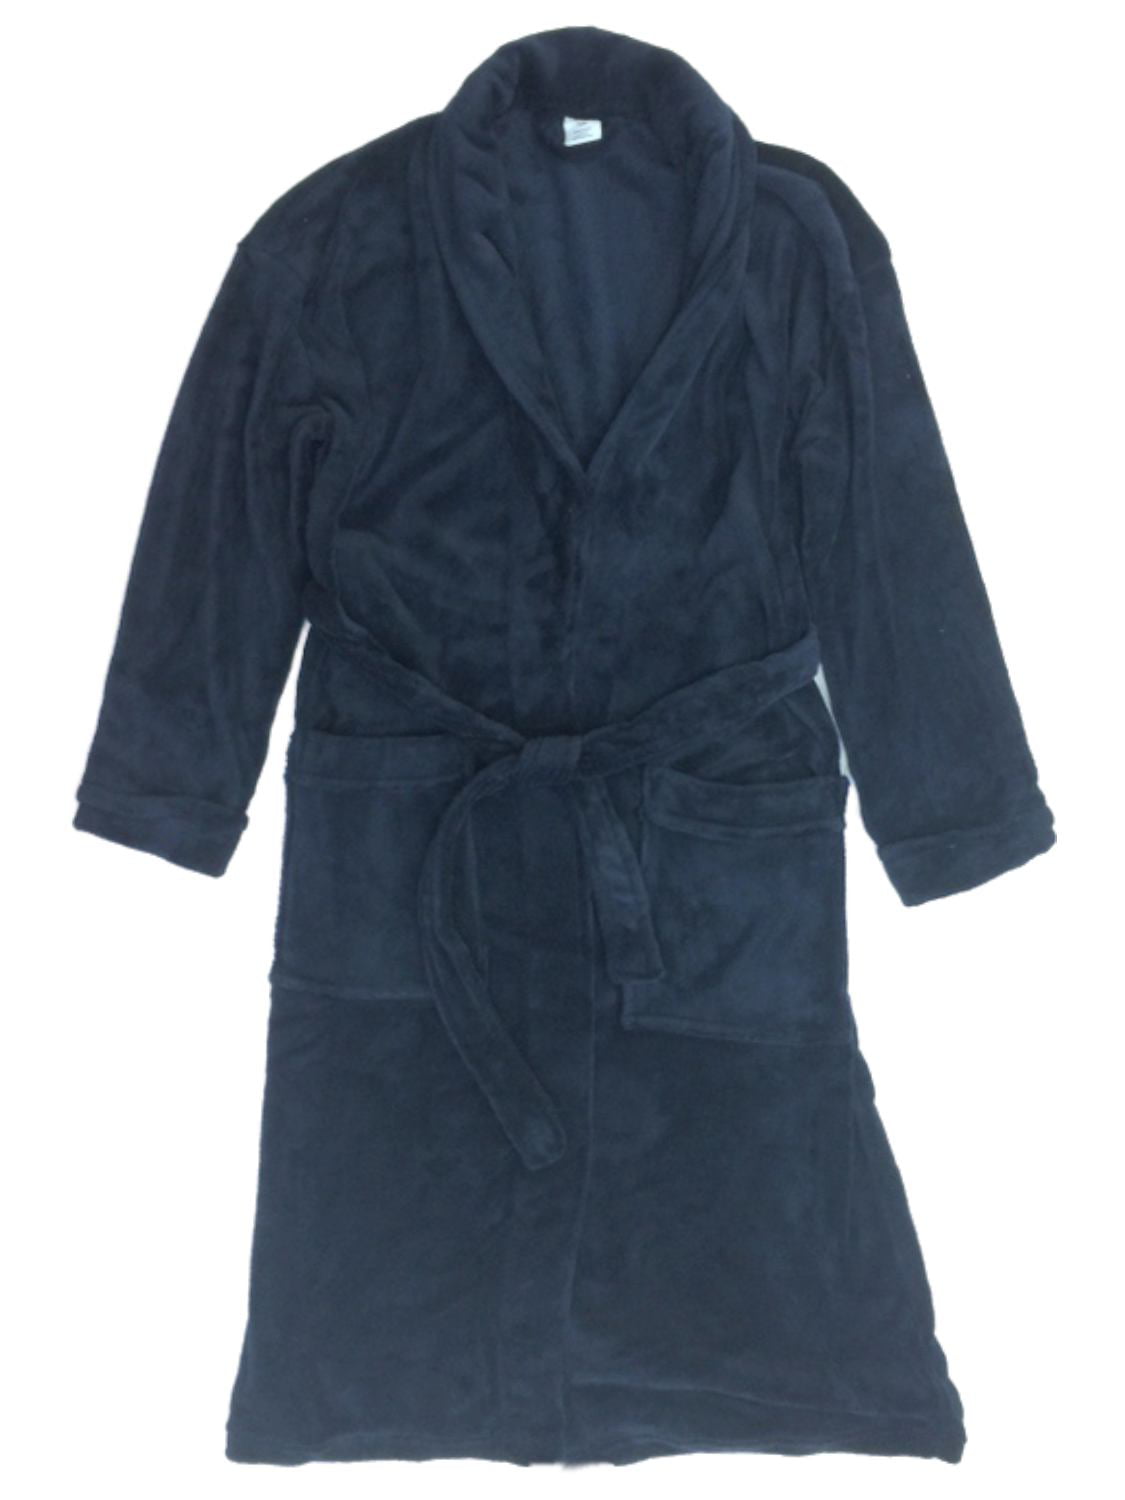 MENS DRESSING GOWNS WITH POCKETS   NIGHTWEAR  BLACK NAVY